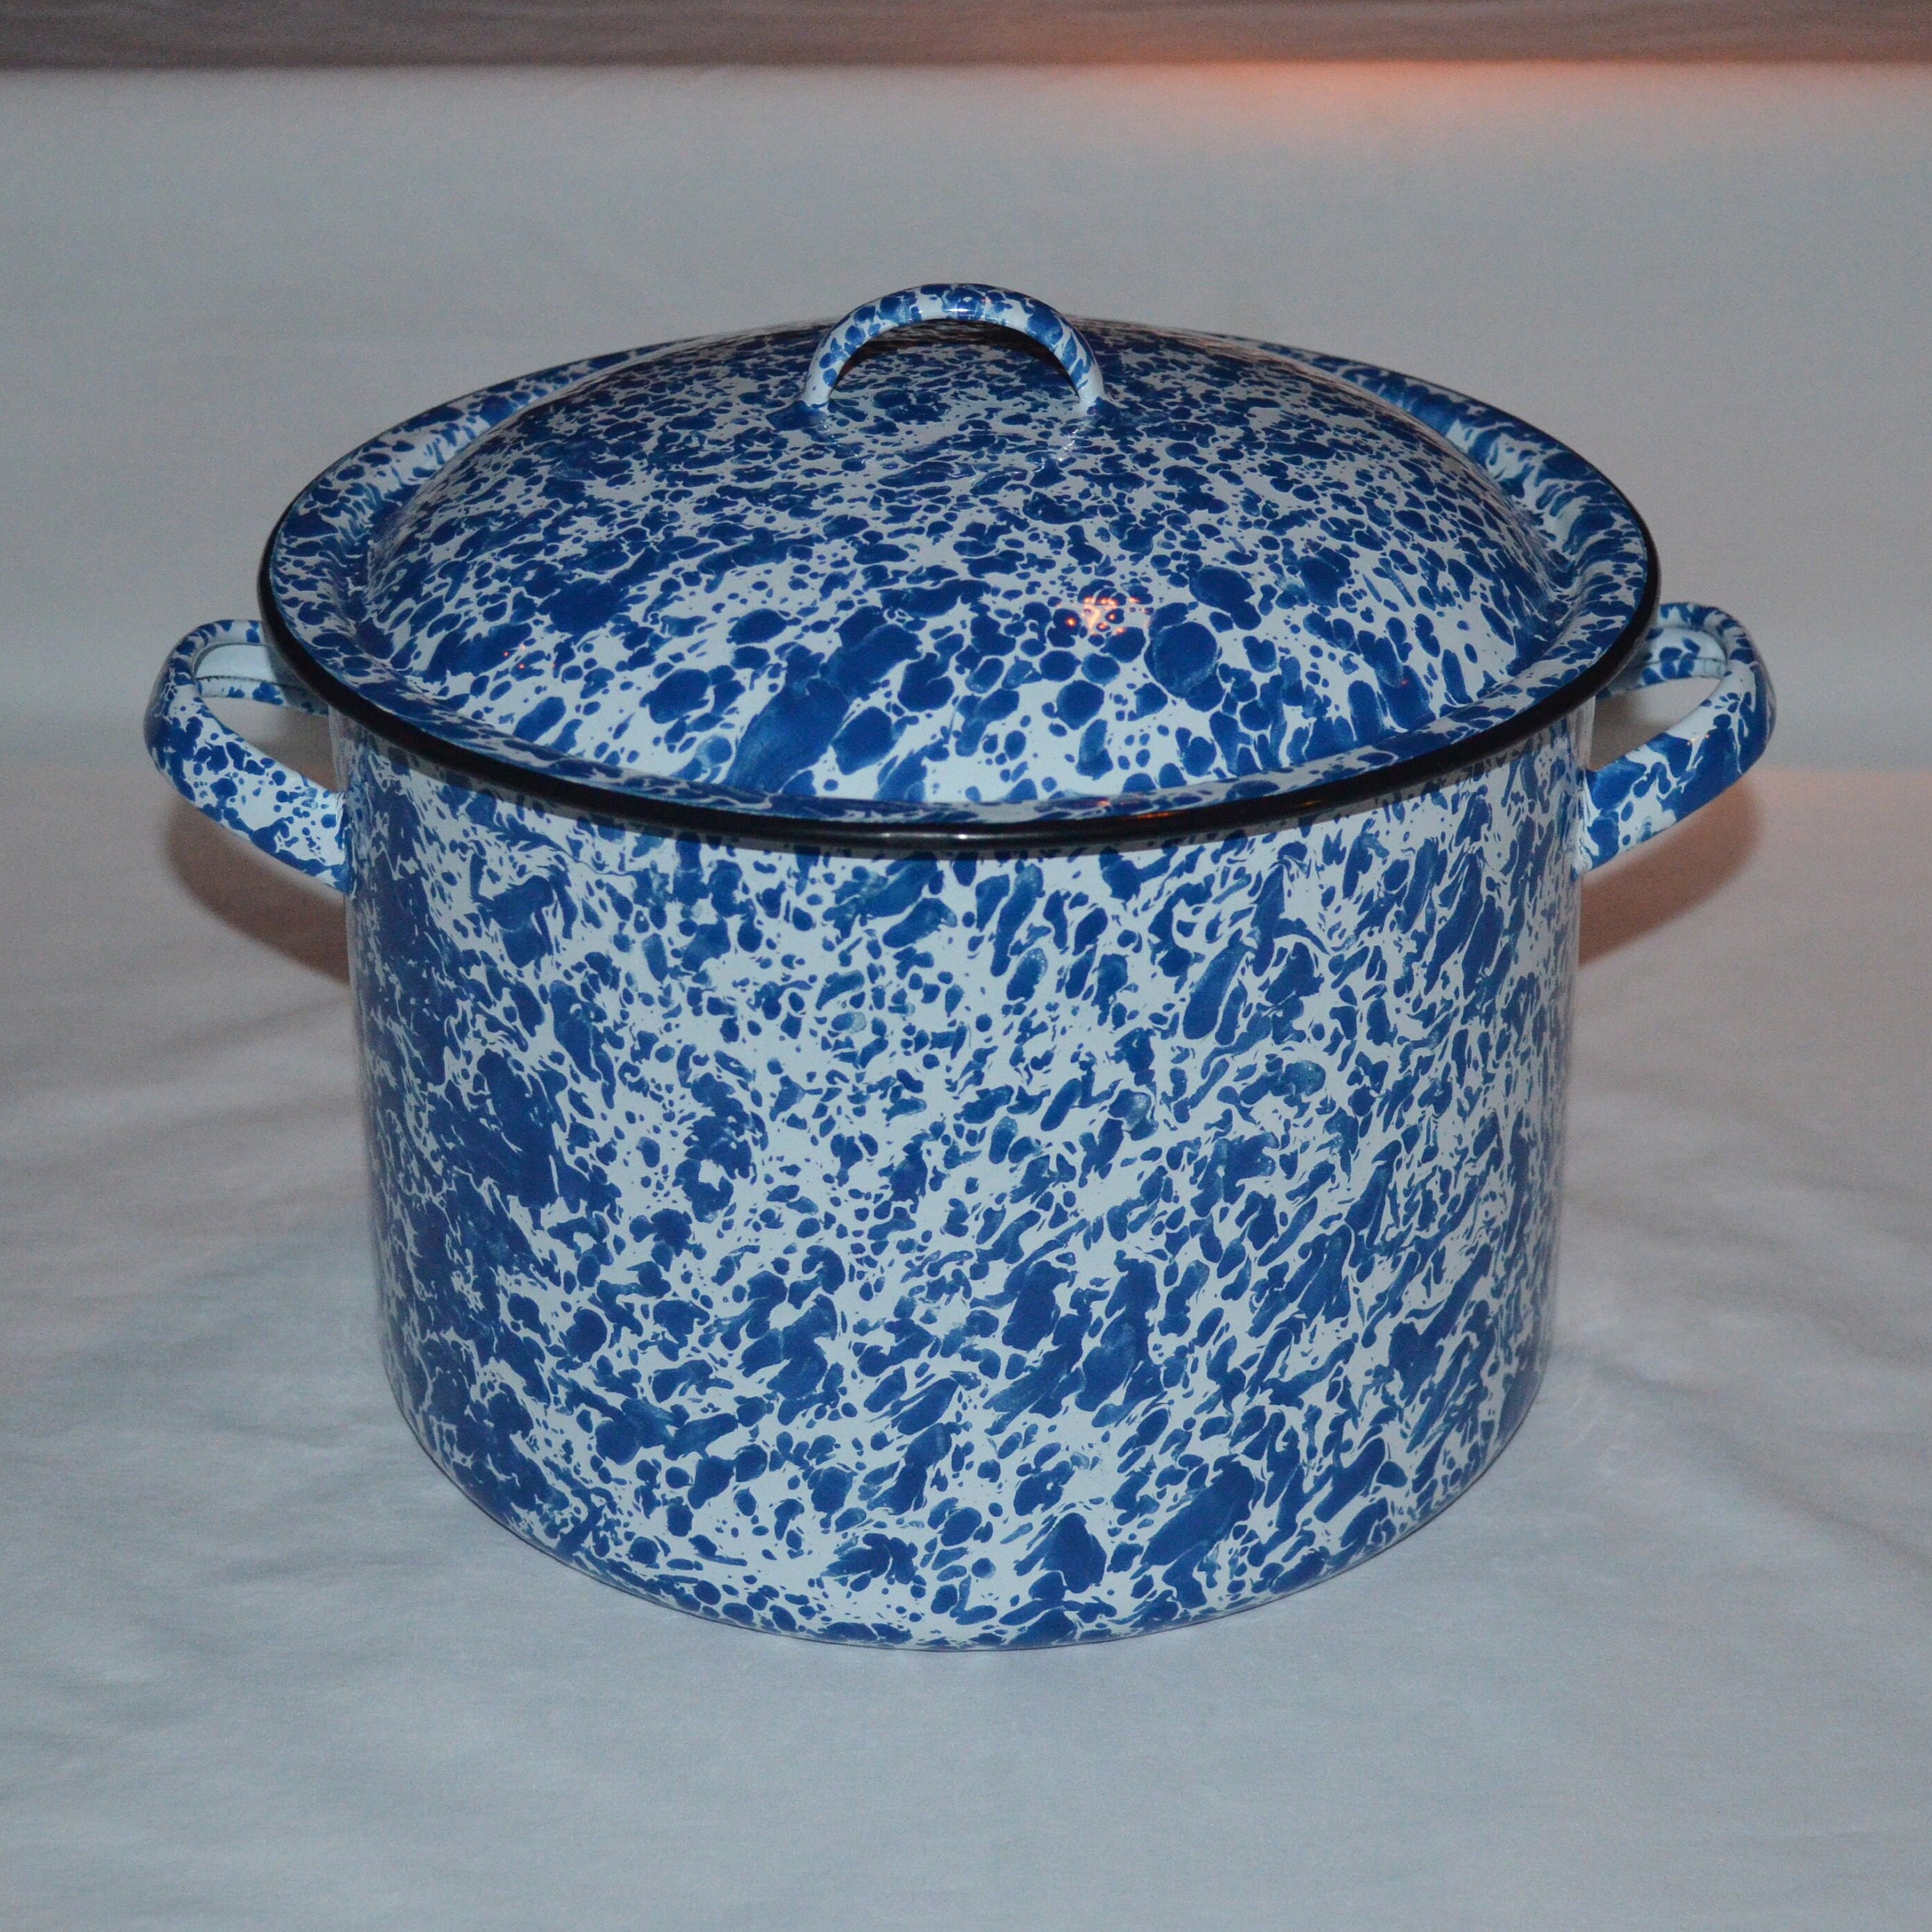 2 Quart Vintage somerset Enamelware Pot With Lid and White Handles Enameled  Pot With Pink Flowers and Blue Ribbon 